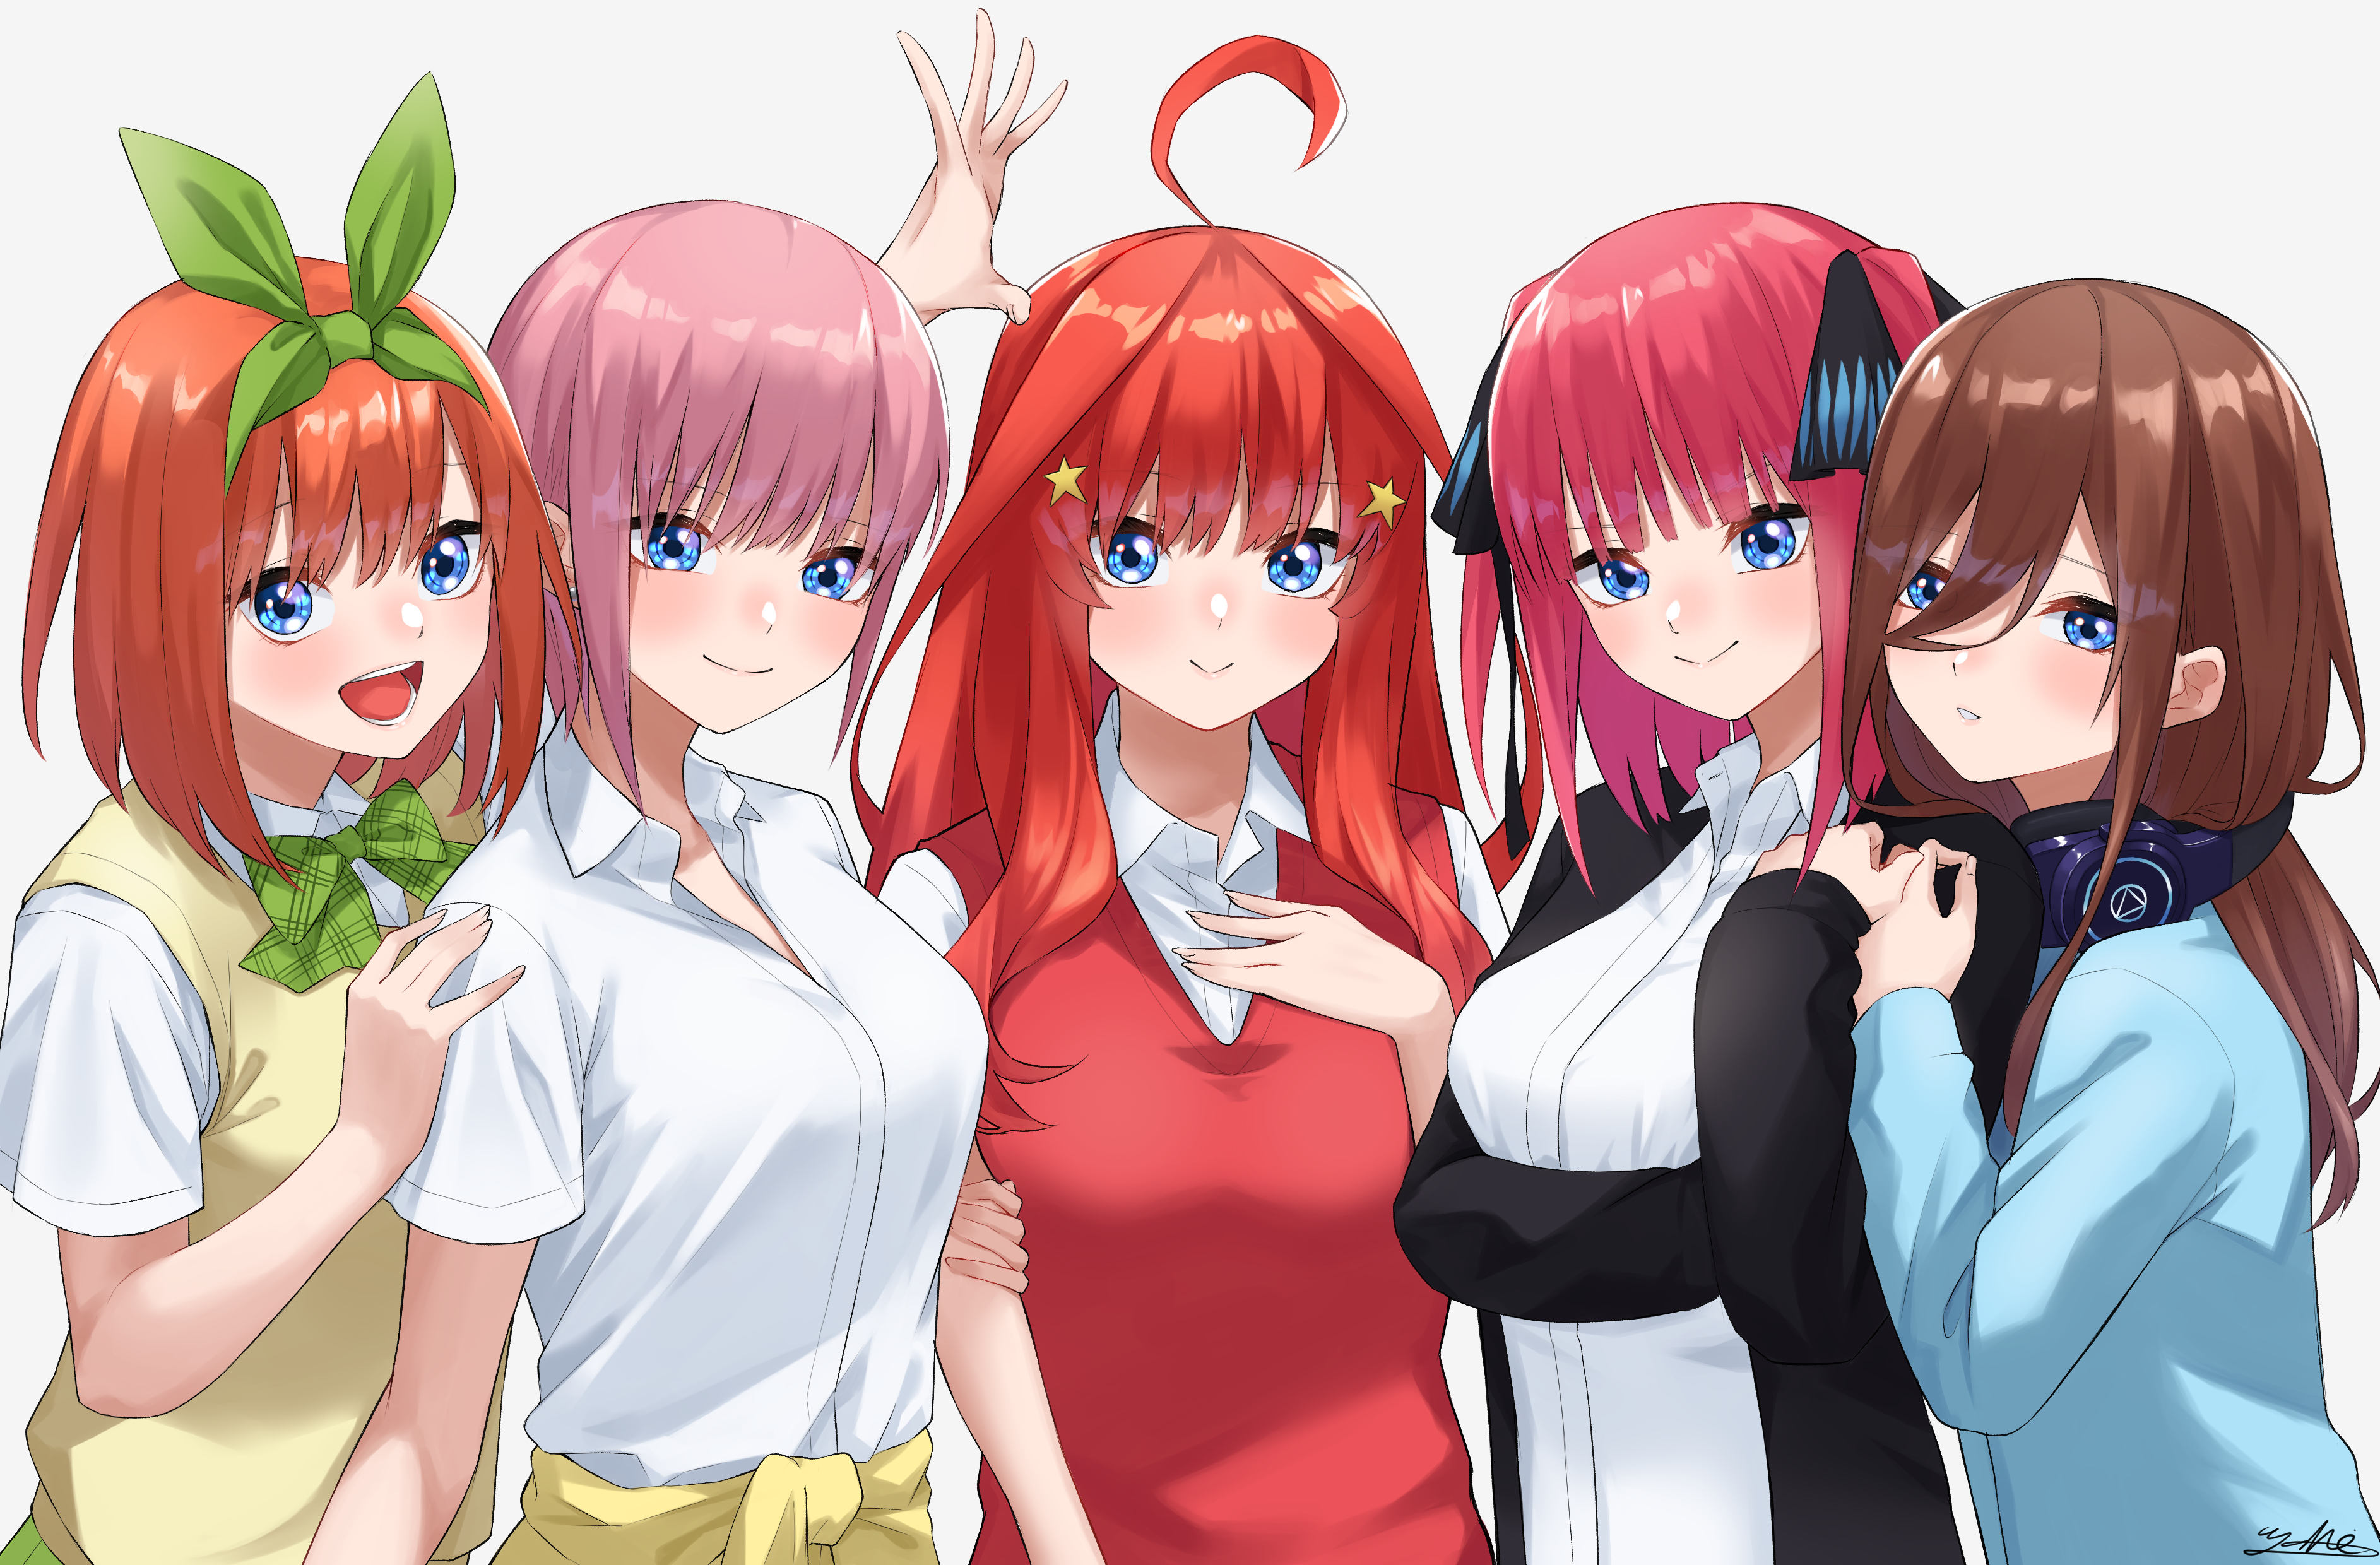 The Quintessential Quintuplets HD Wallpaper by yuhi